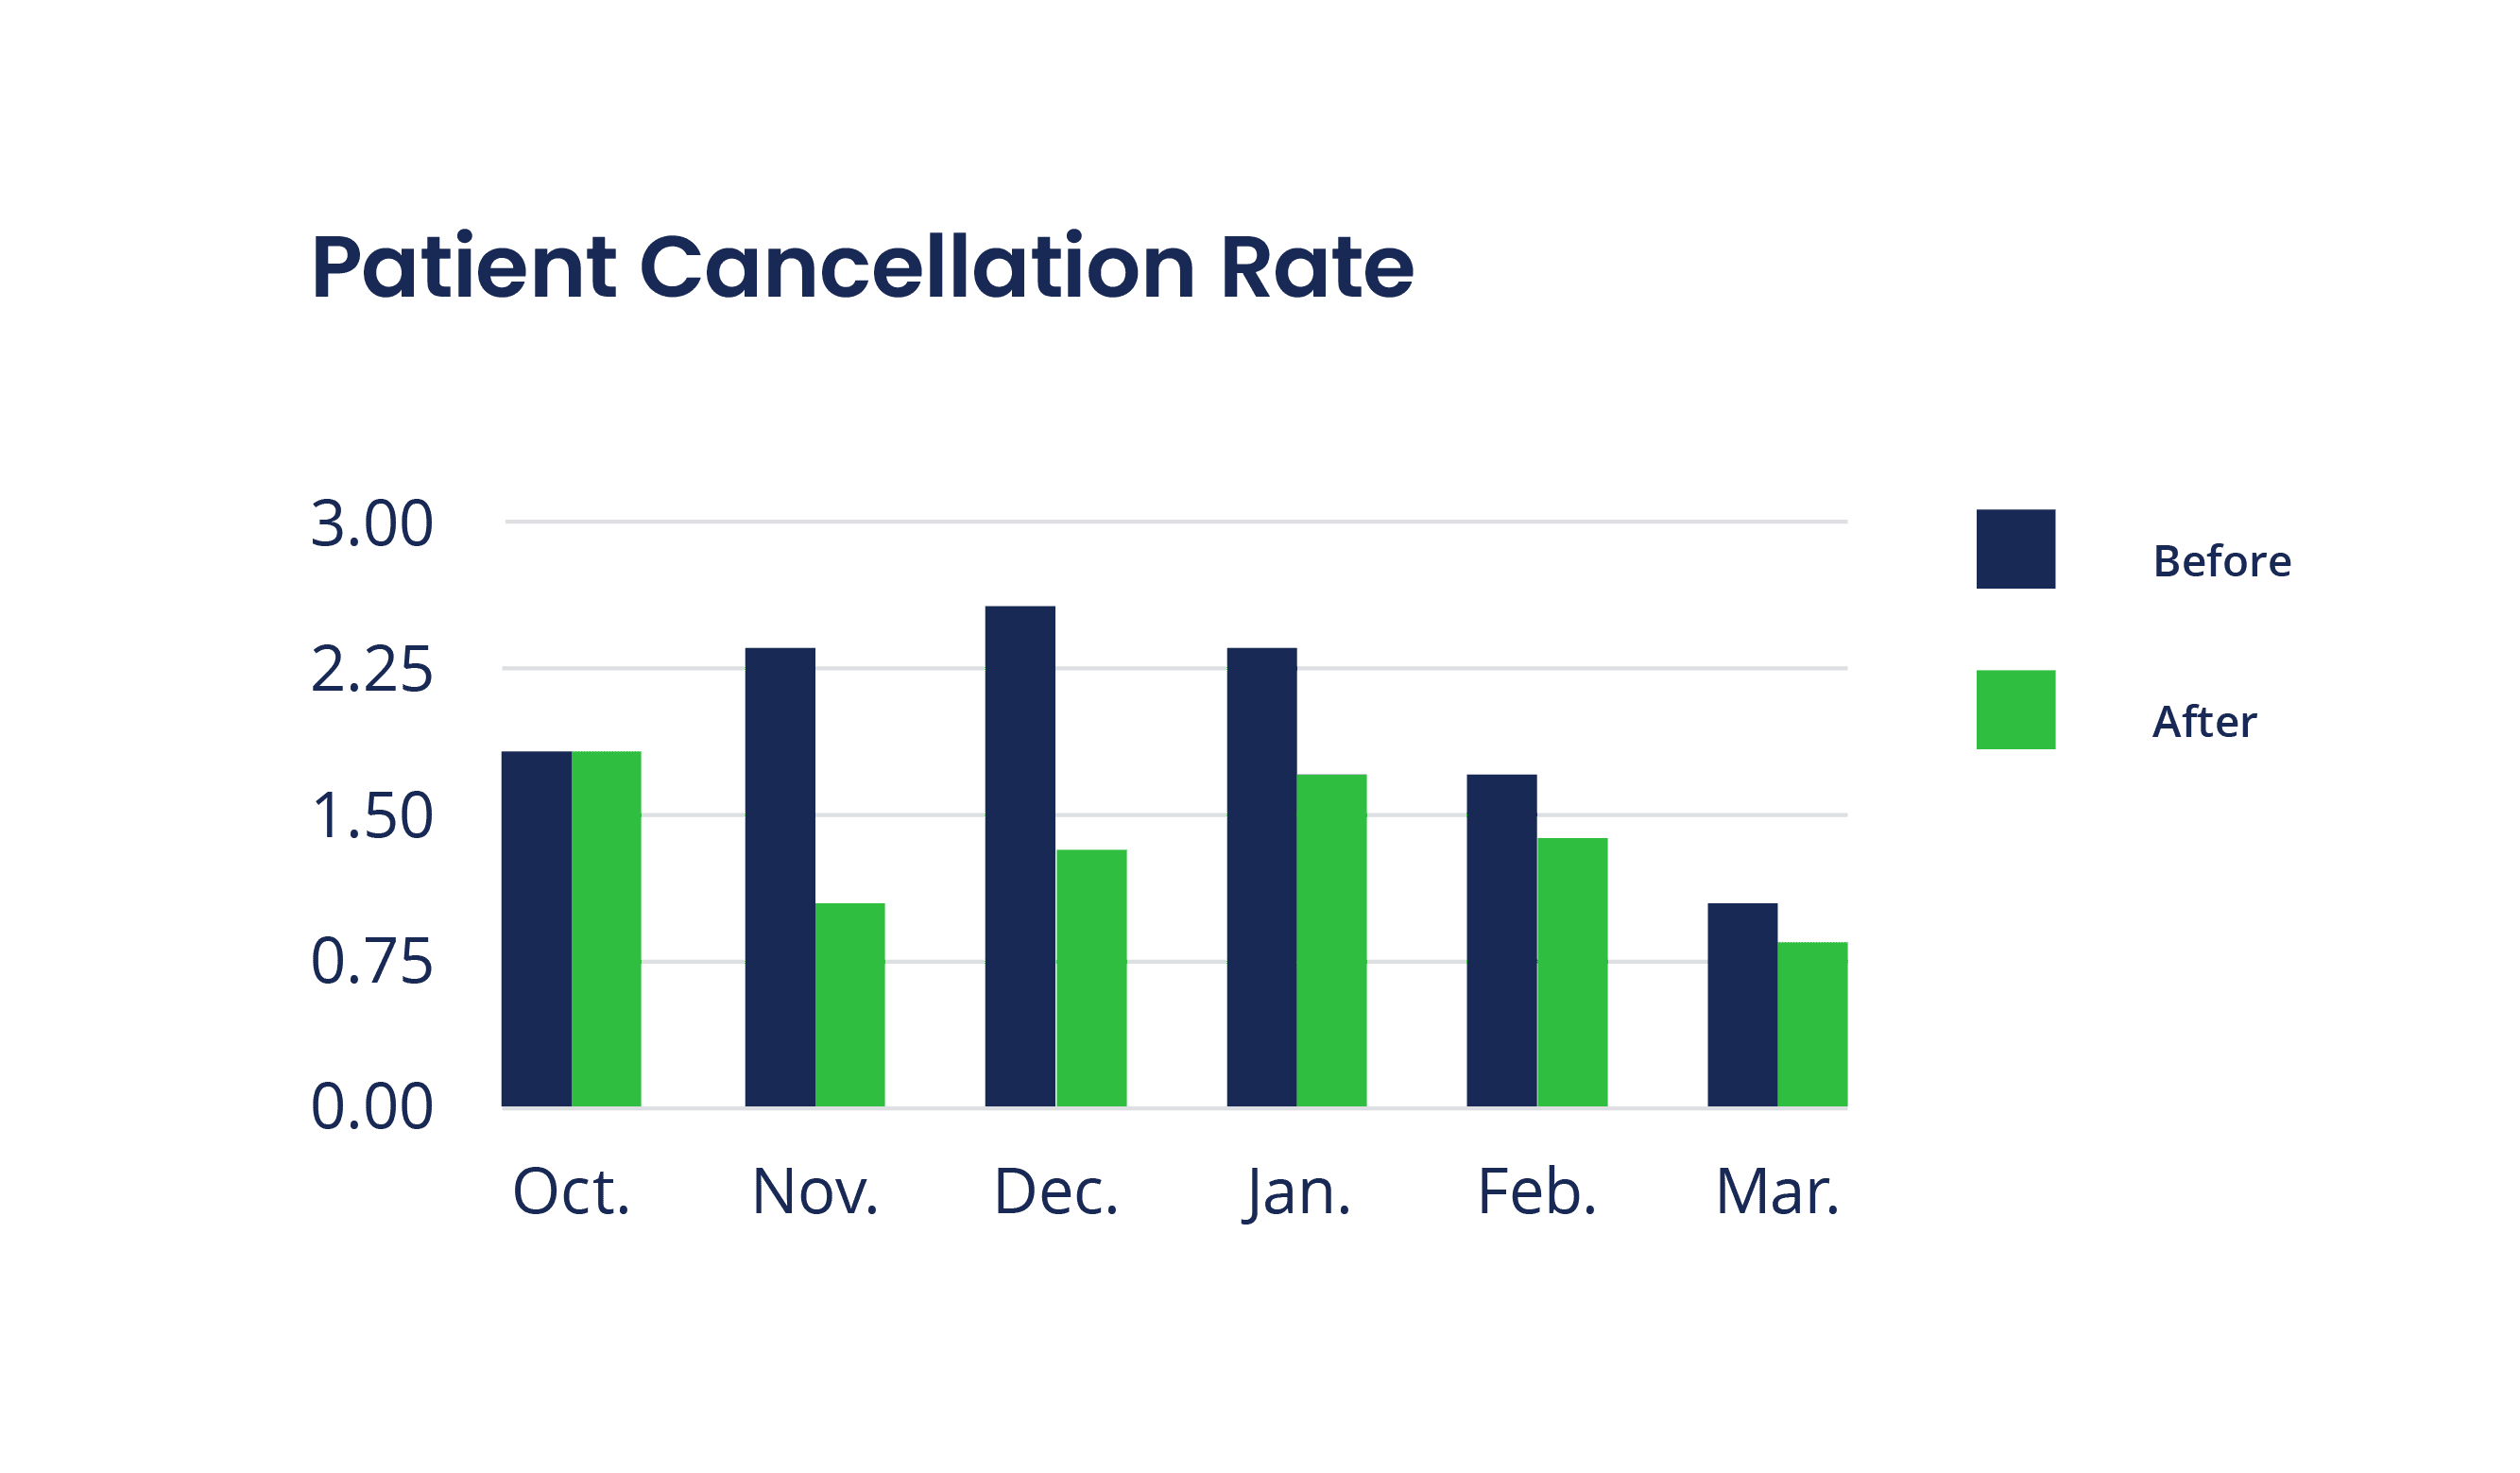 Bar chart depicting patient cancellation rate from October to March, comparing before and after